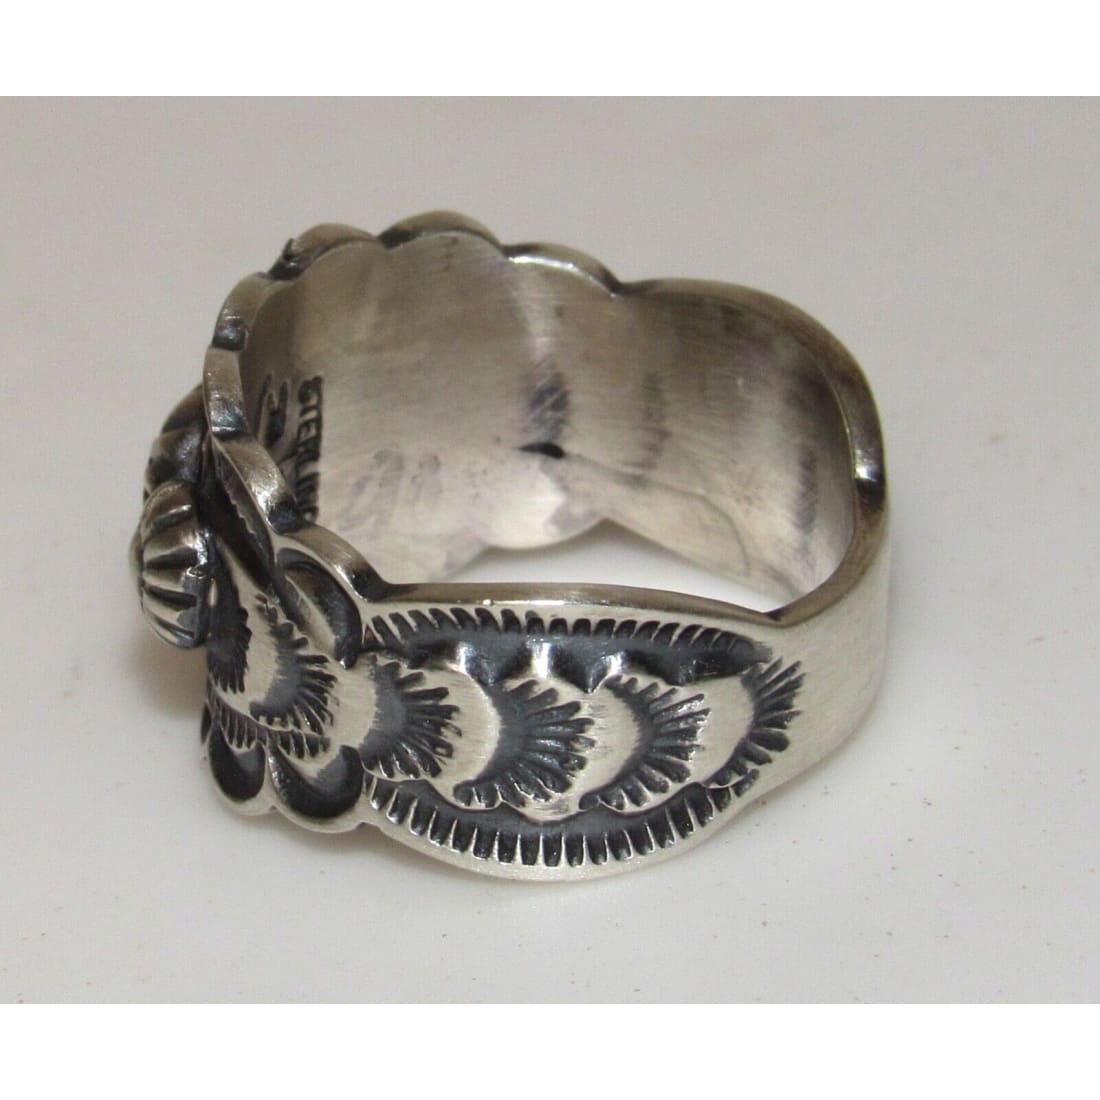 Navajo Band Ring Size 7 Sterling Silver Repousse Band Signed